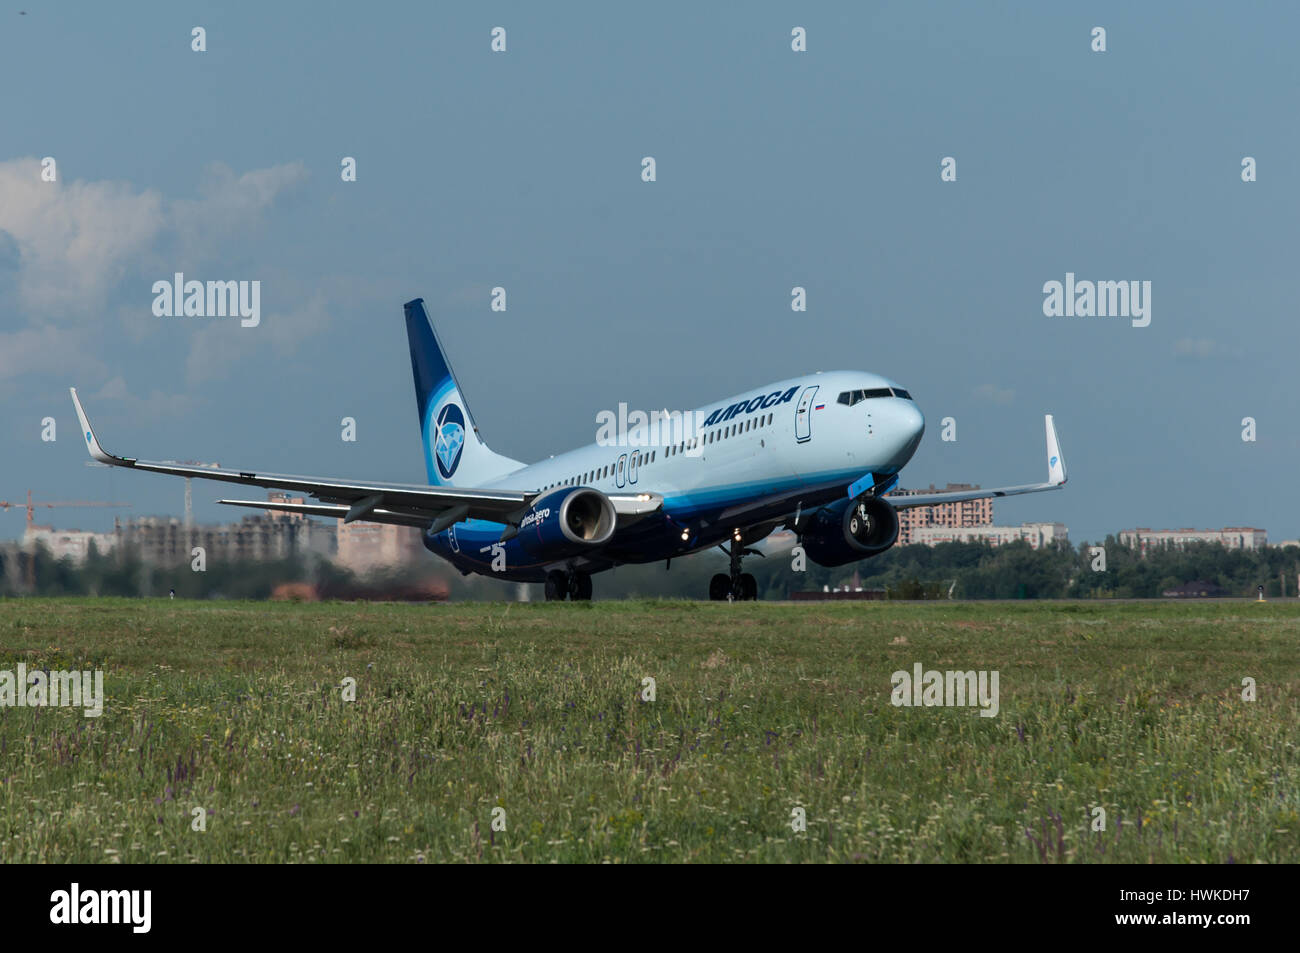 Takeoff of the aircraft Boeing-737, Rostov-on-Don, Russia, 15th of June 2015. Official spotting. Stock Photo